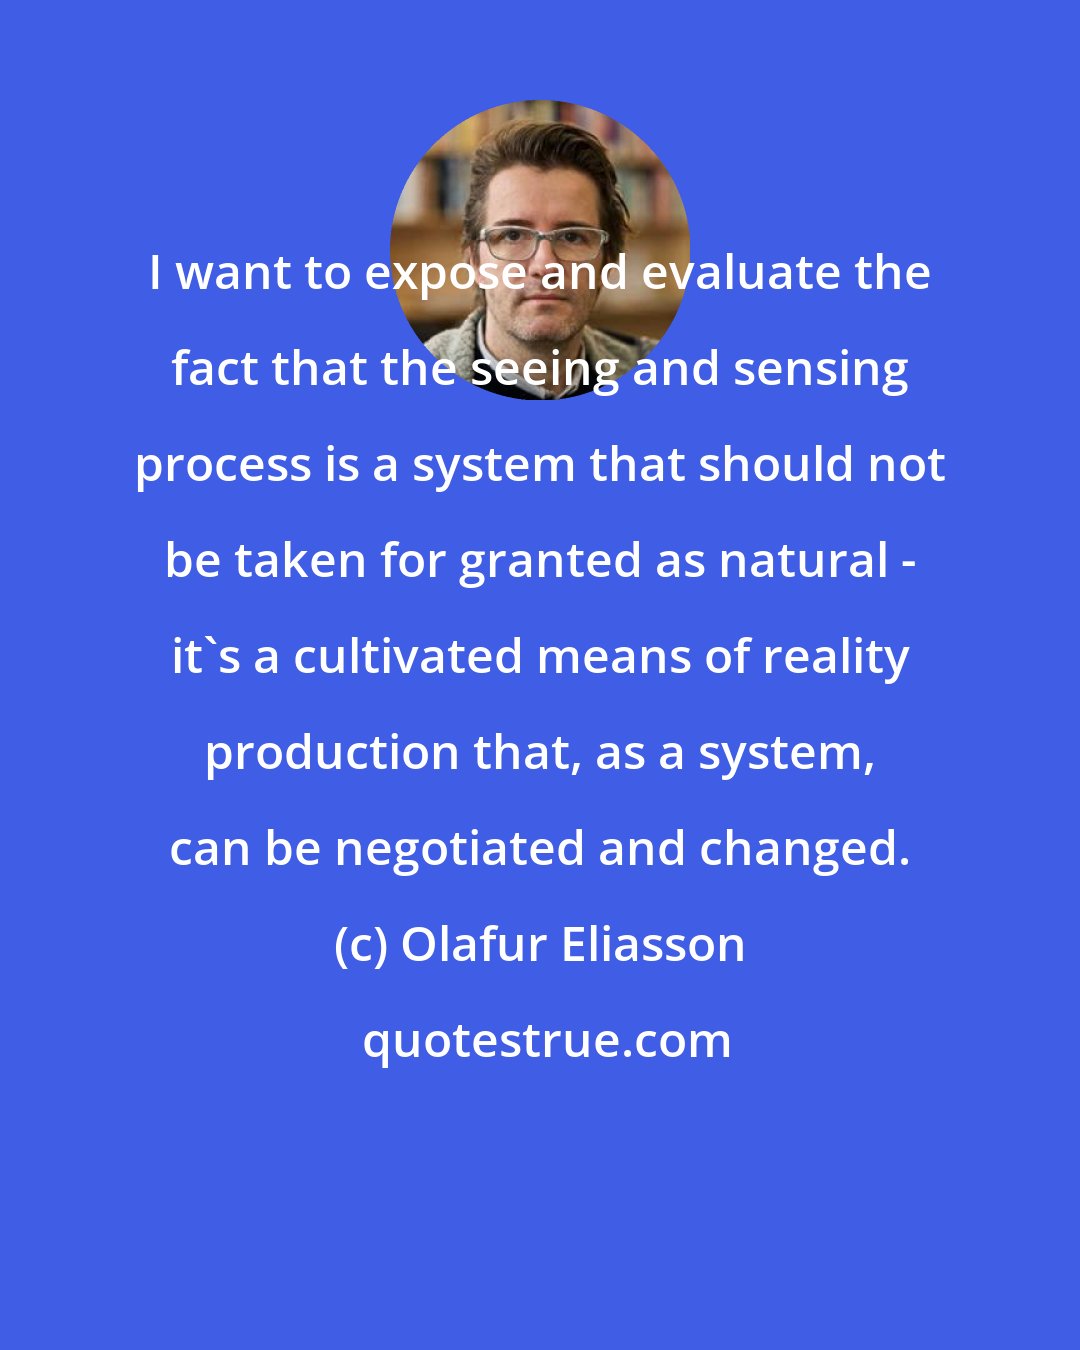 Olafur Eliasson: I want to expose and evaluate the fact that the seeing and sensing process is a system that should not be taken for granted as natural - it's a cultivated means of reality production that, as a system, can be negotiated and changed.